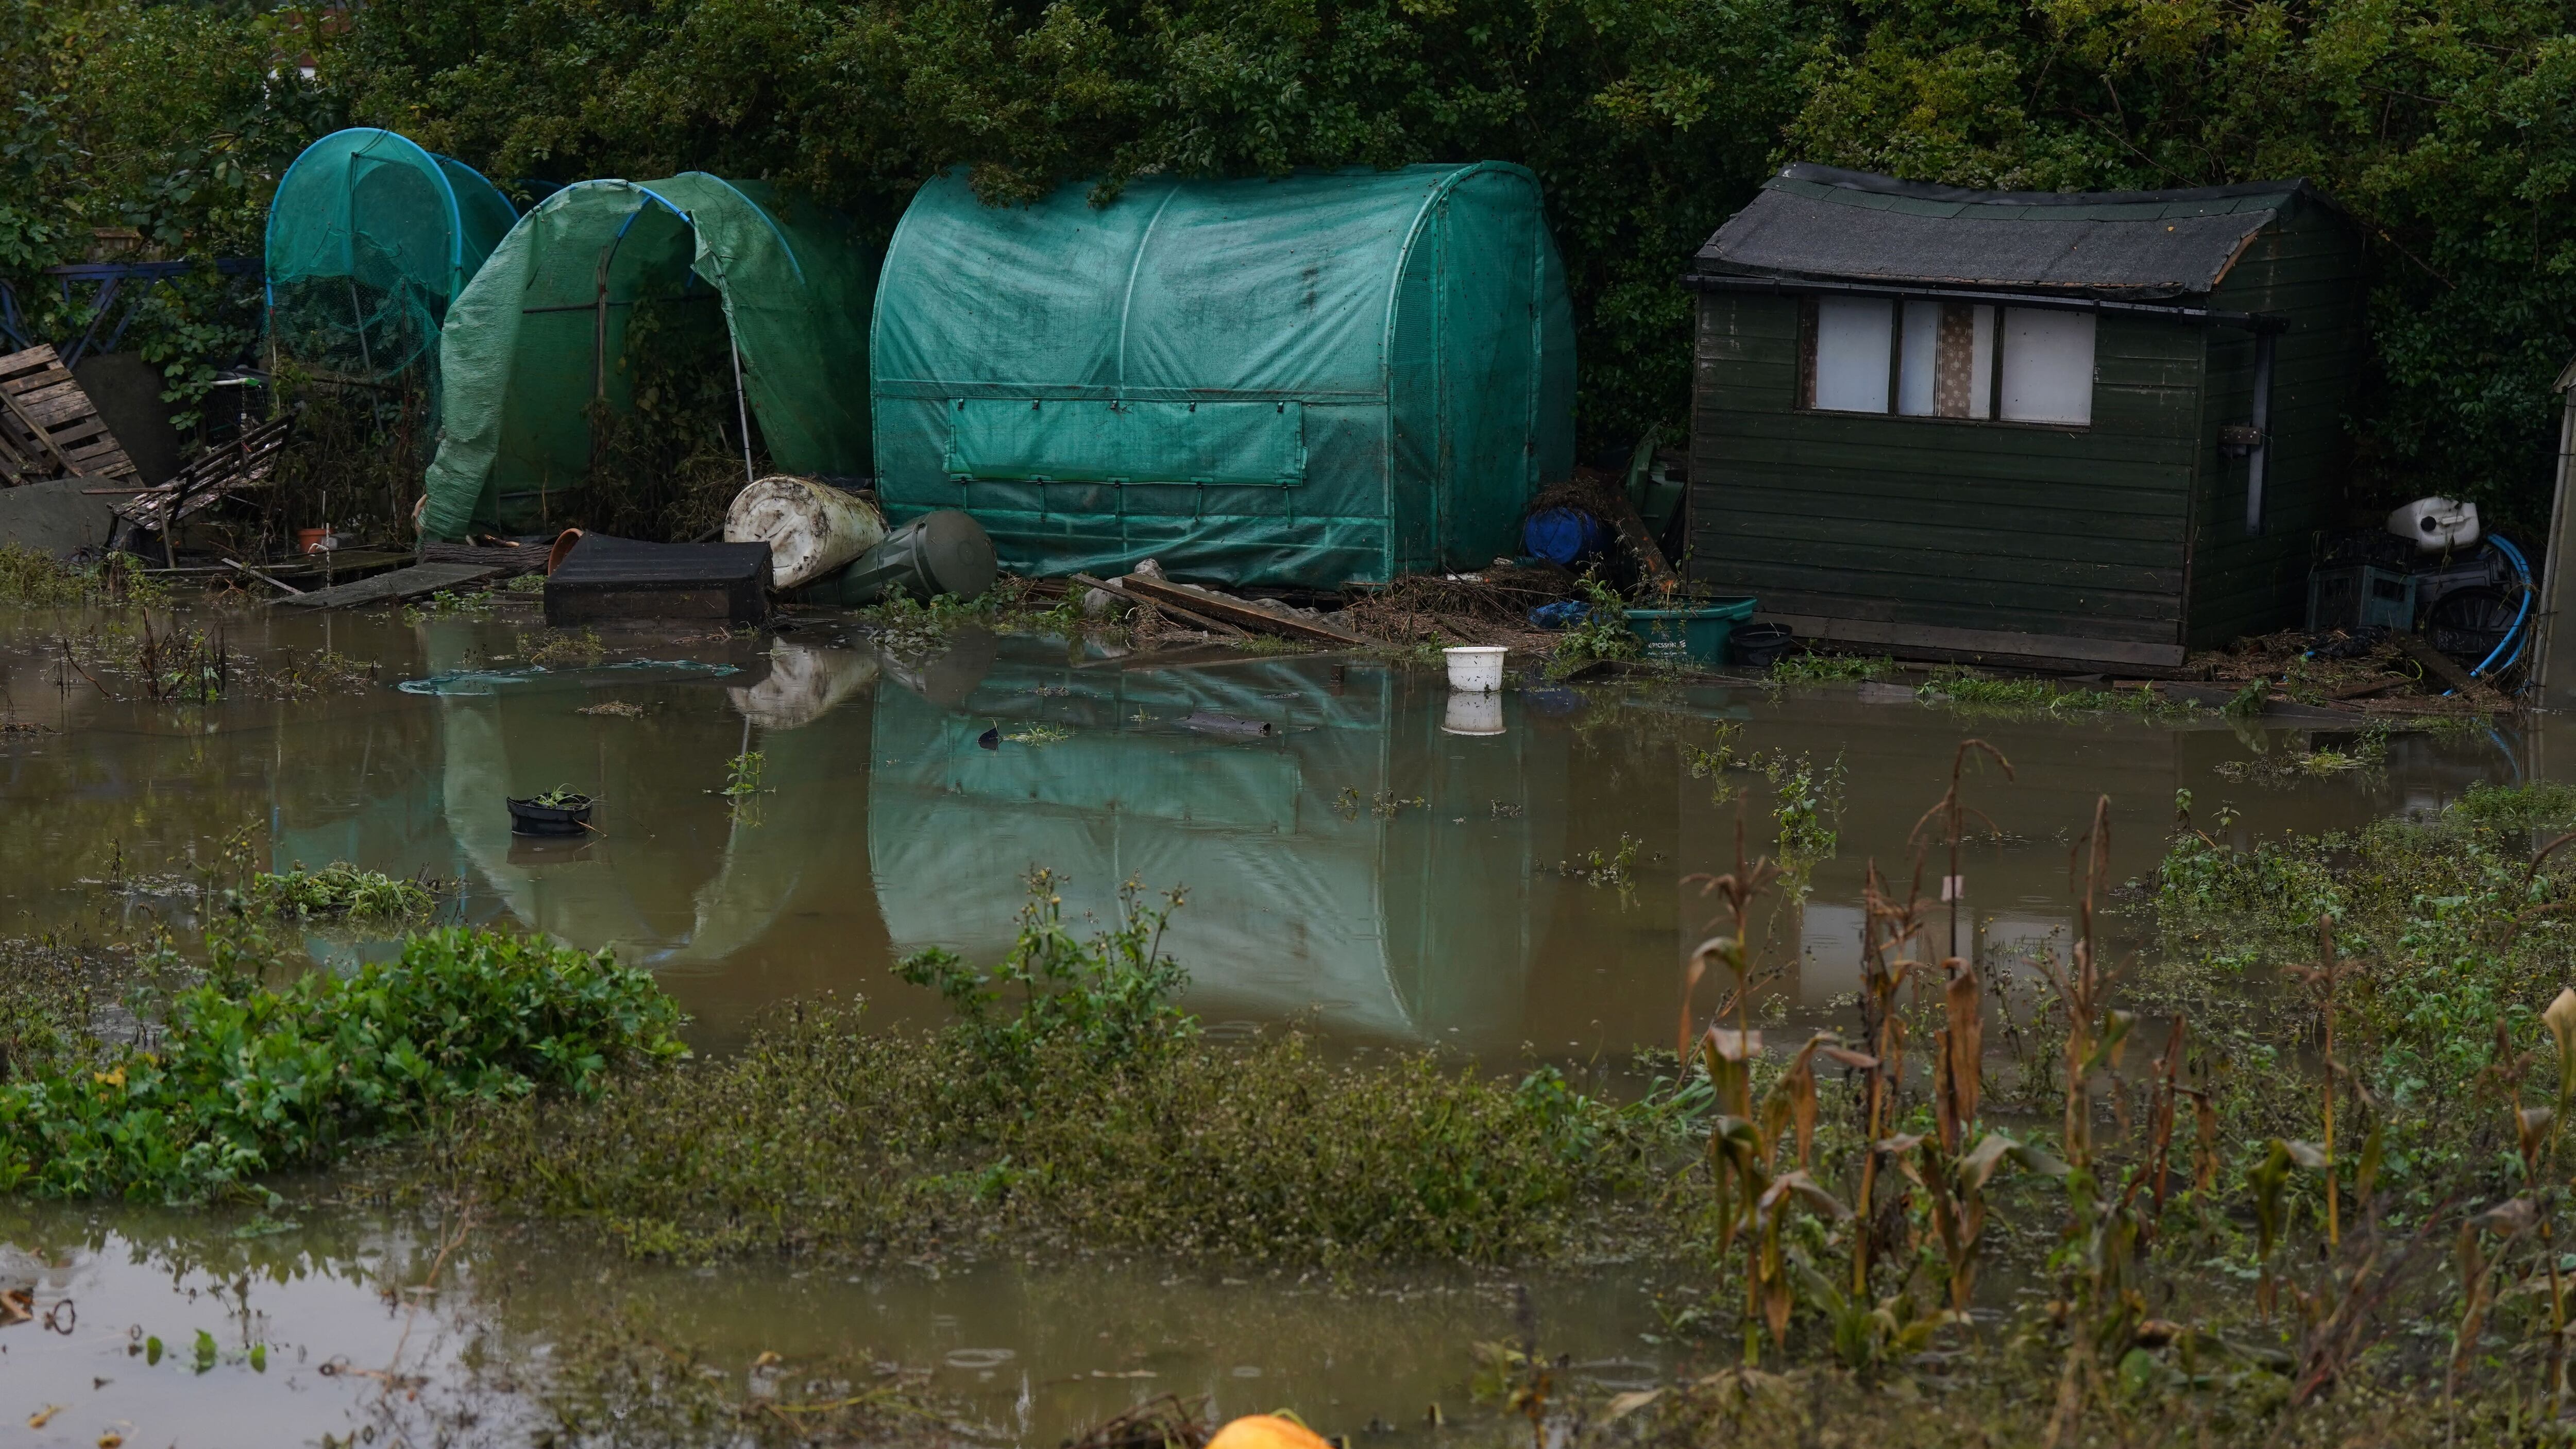 Debris and floodwater in allotments in Retford, Nottinghamshire, after Storm Babet passed through the area (Jacob King/PA)